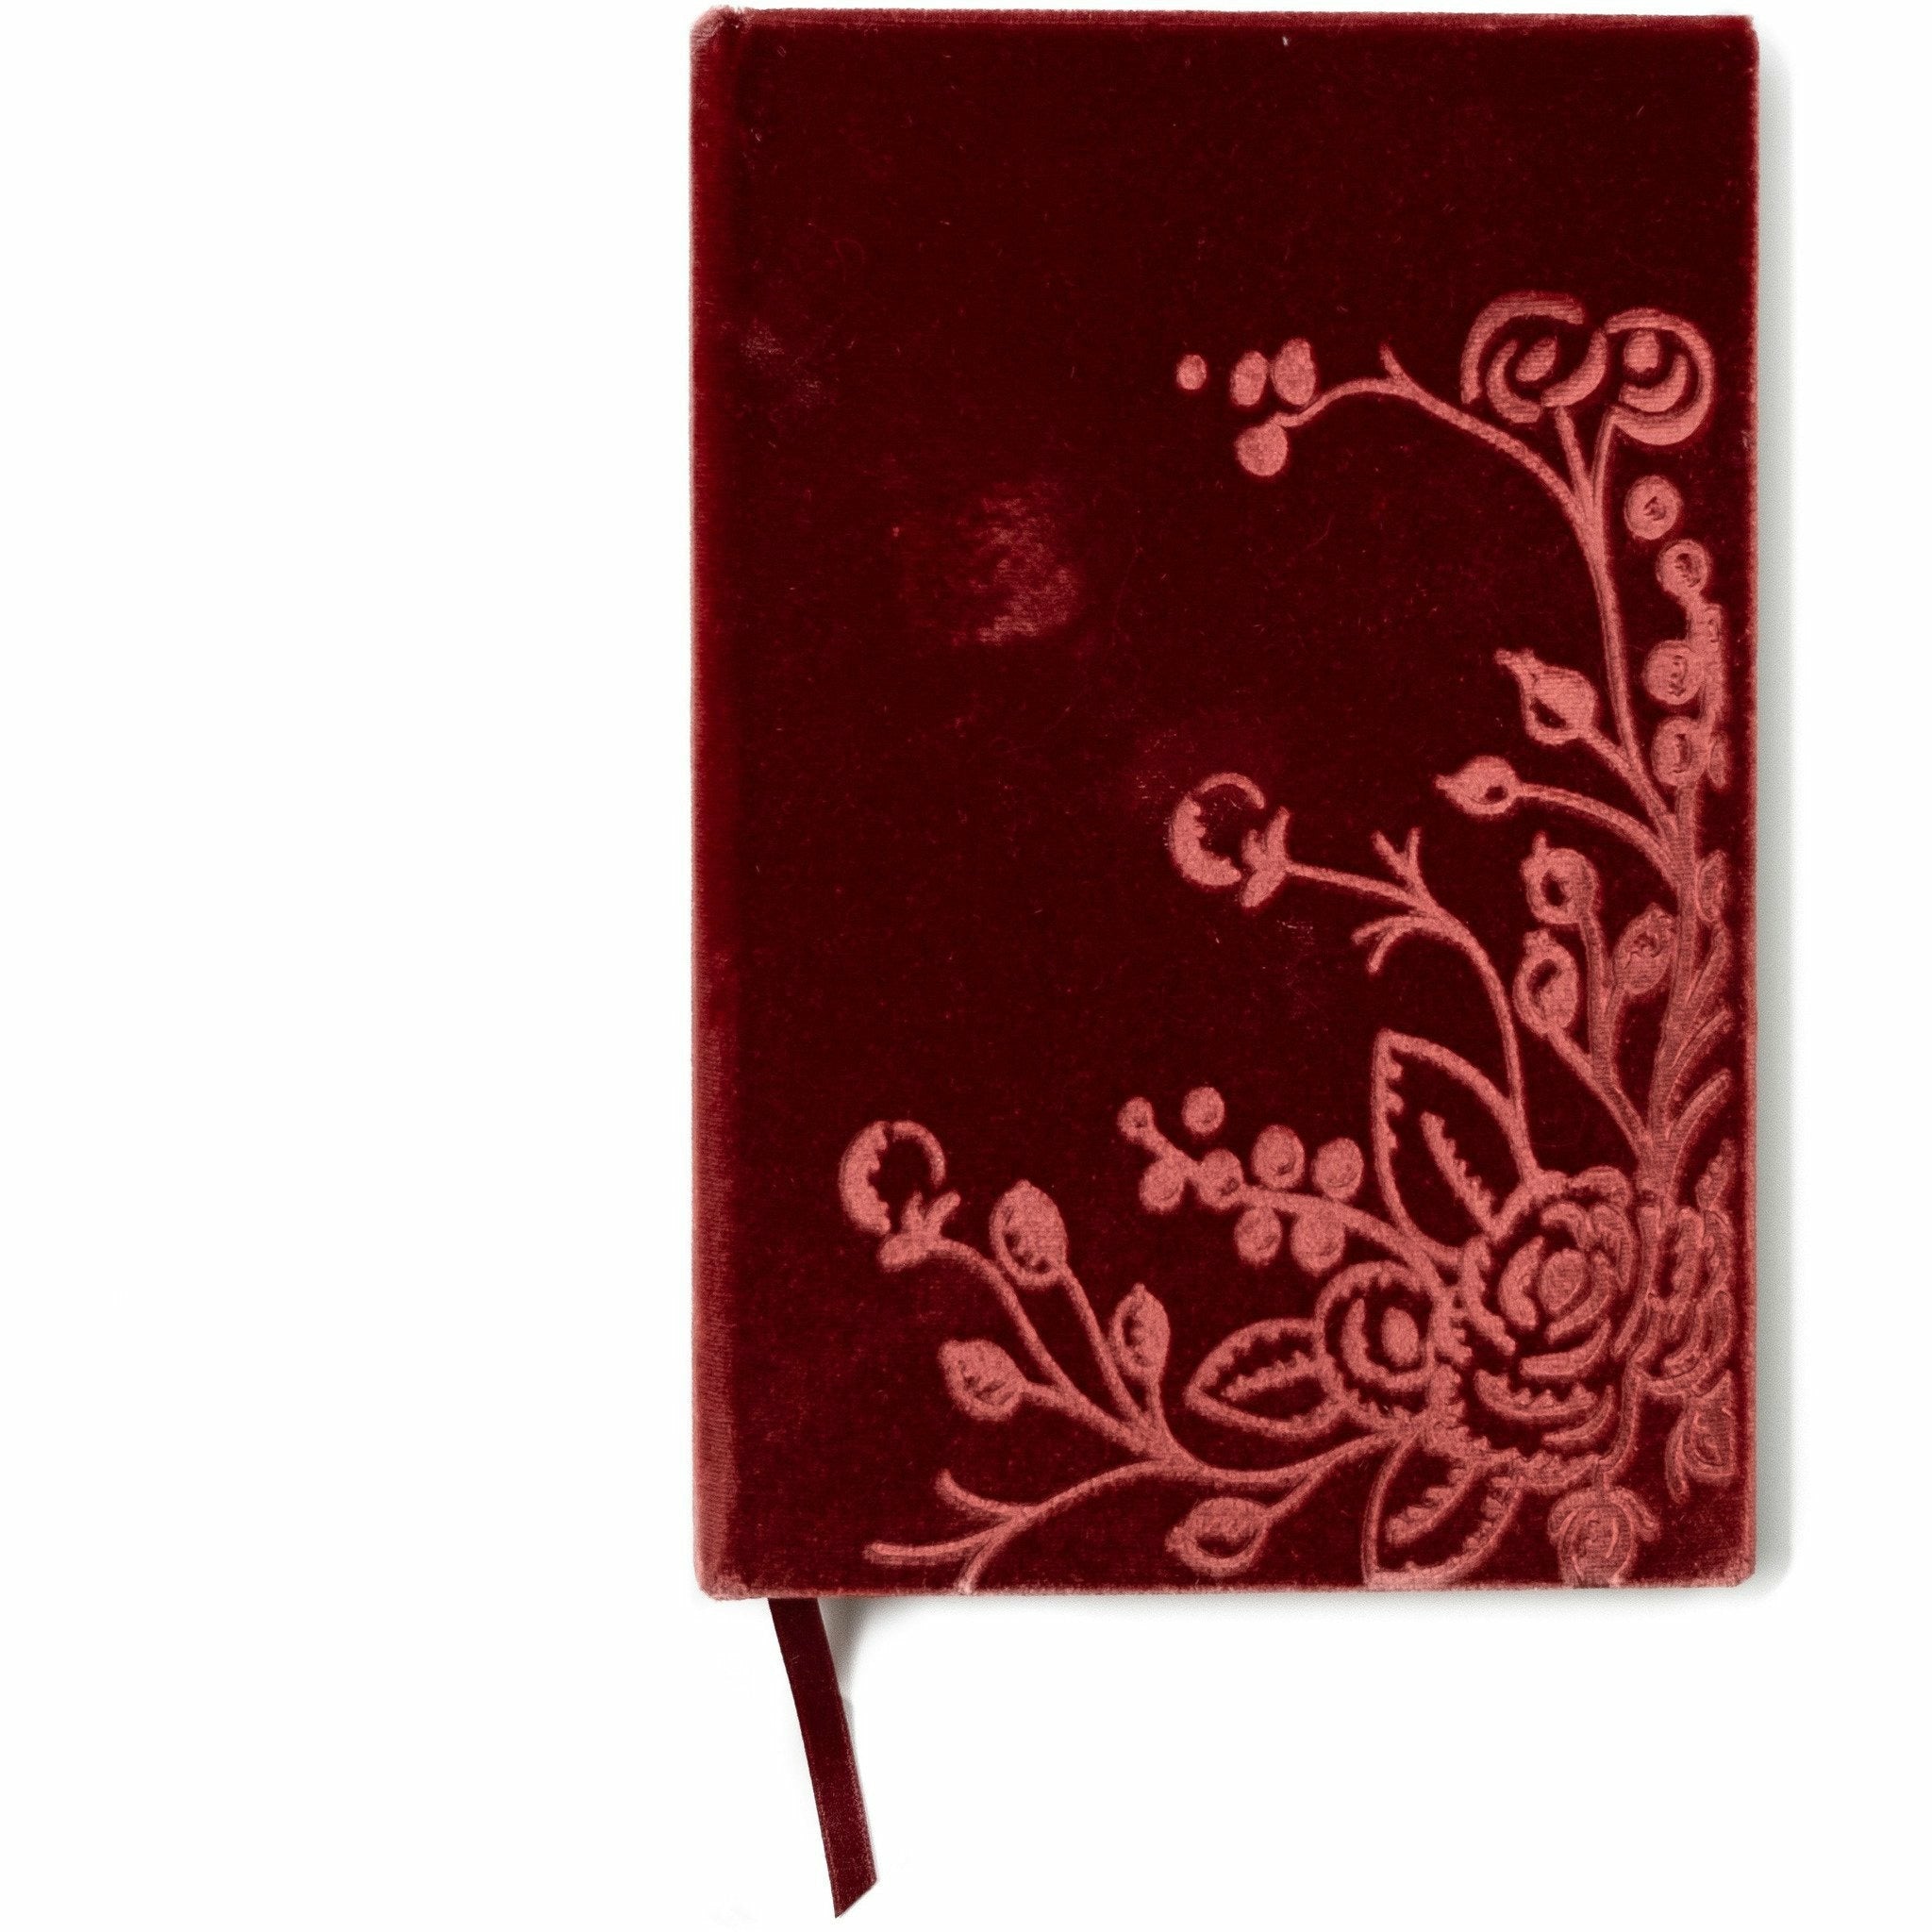 Unique Handmade Botanical Floral Silk Velvet-Covered Notebook - The First Snow